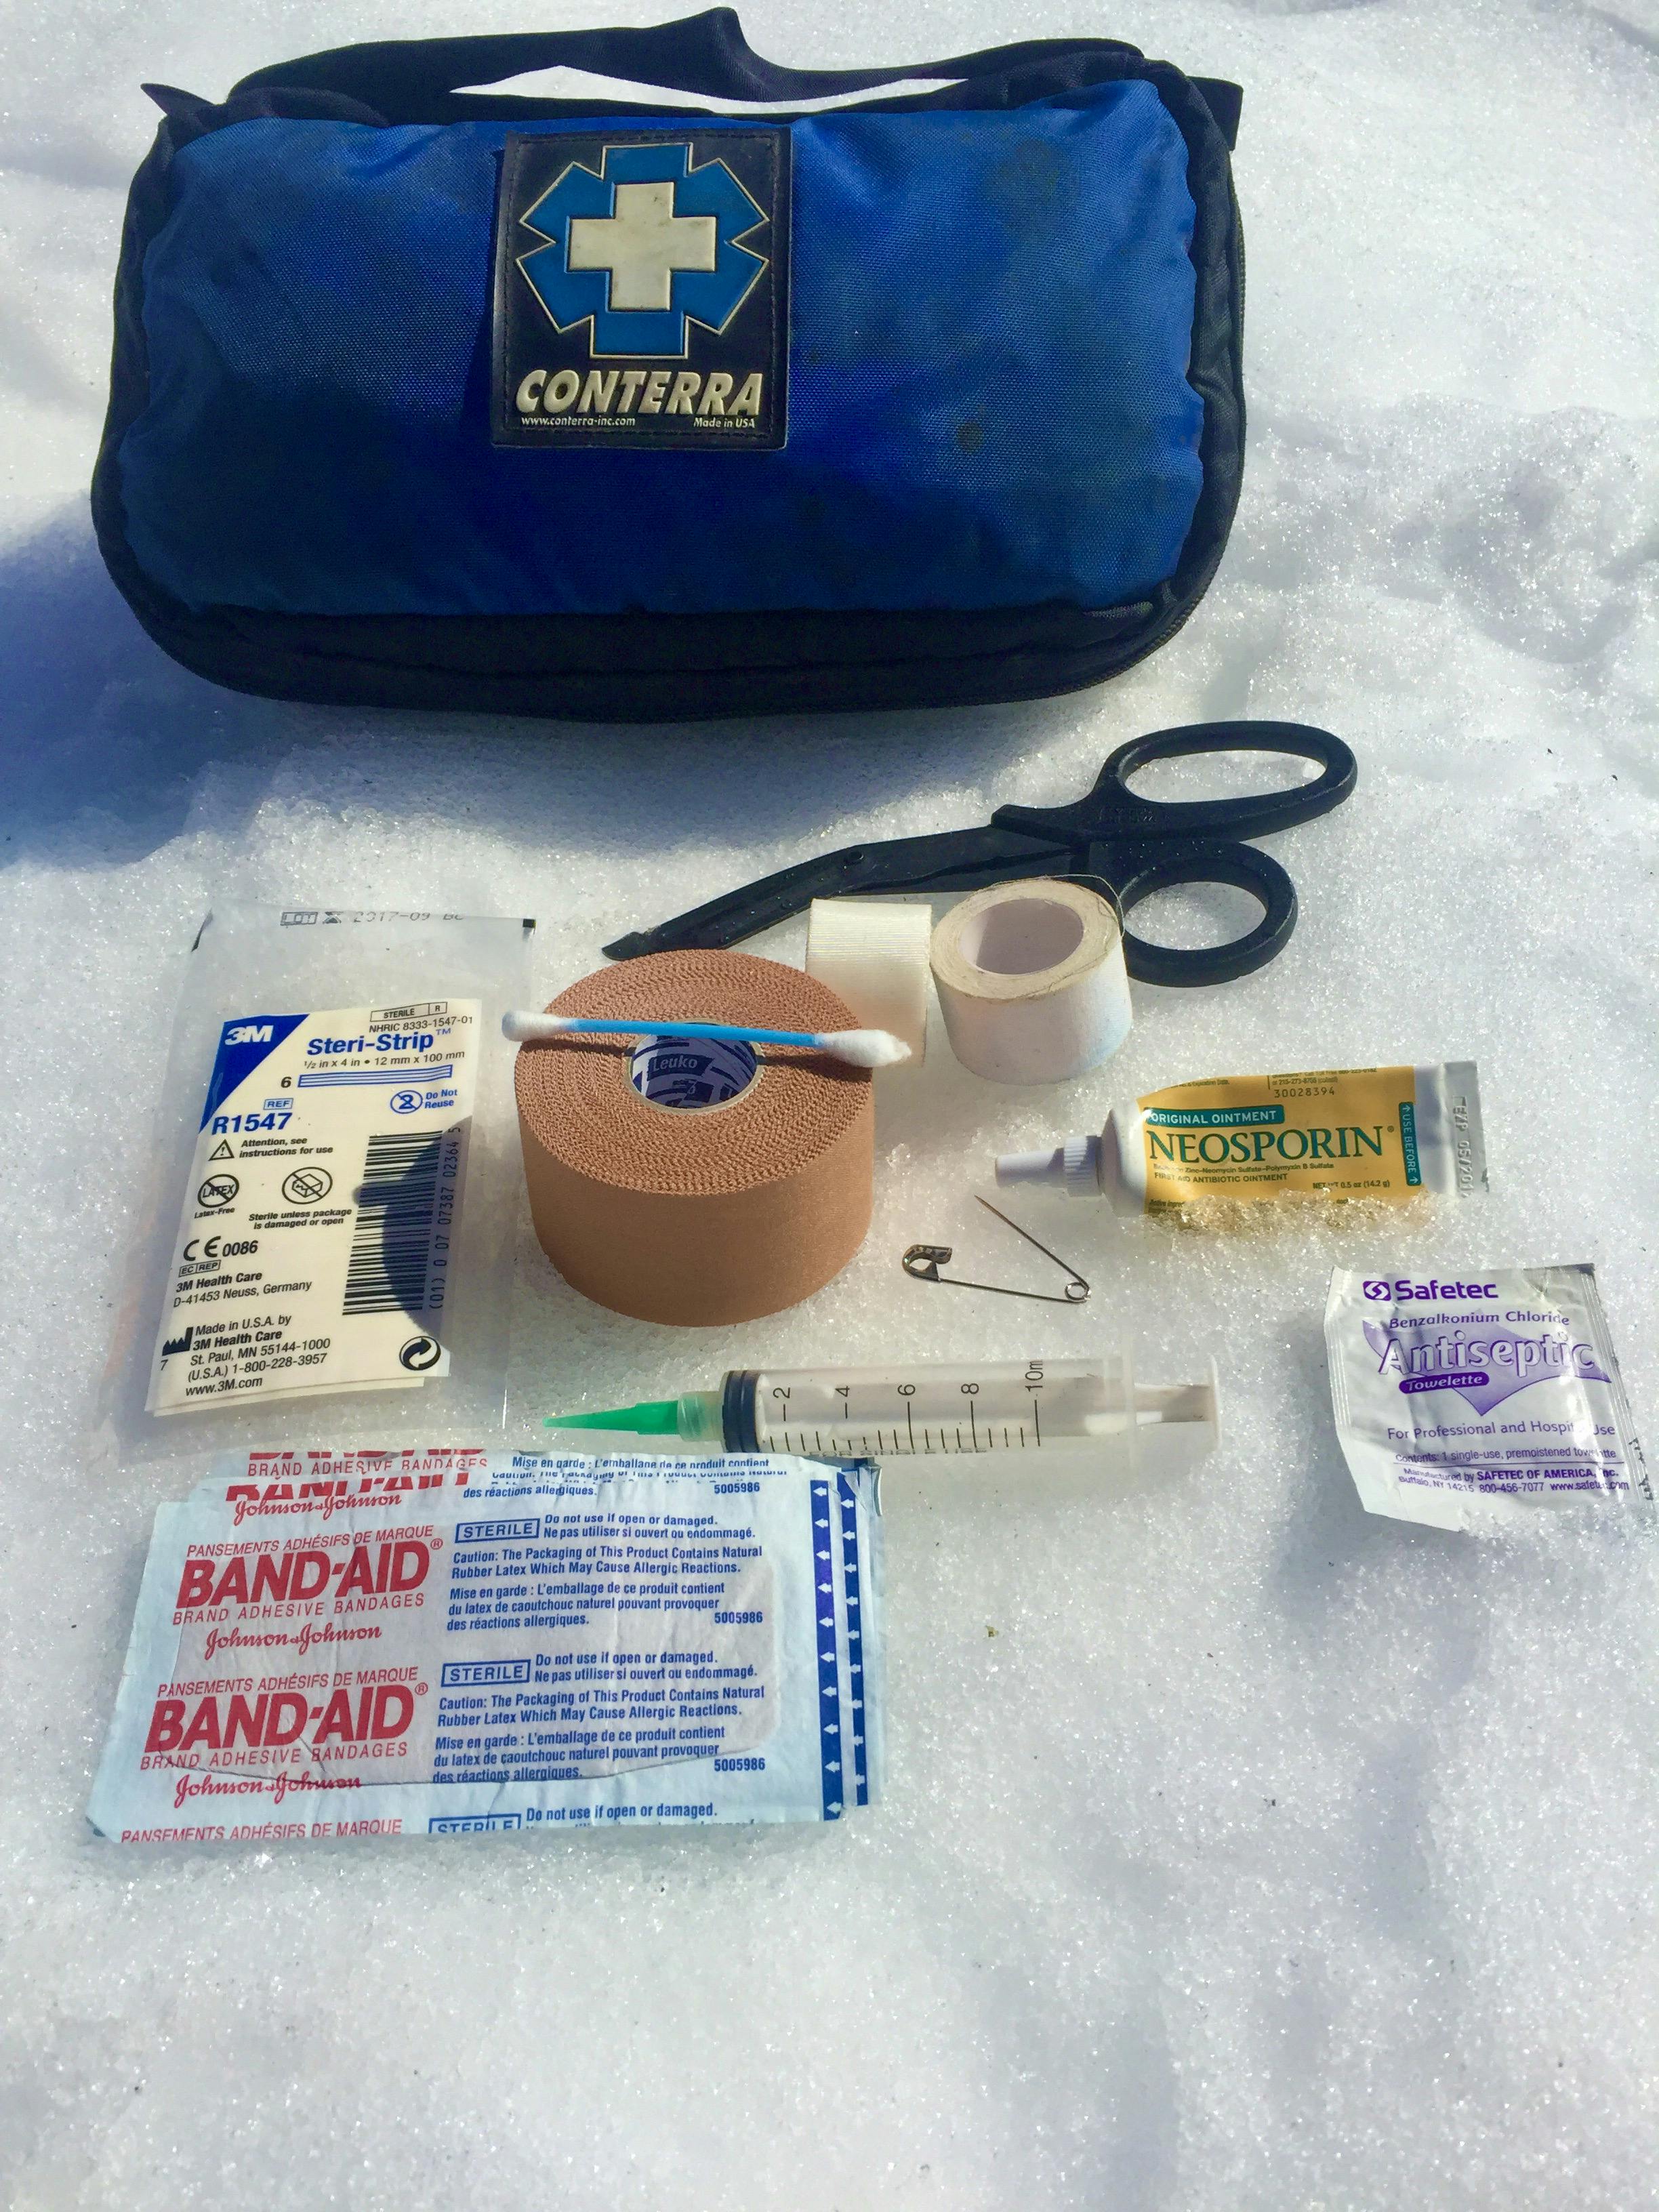 First Aid kit placed on snow to show the recommend essentials one should carry